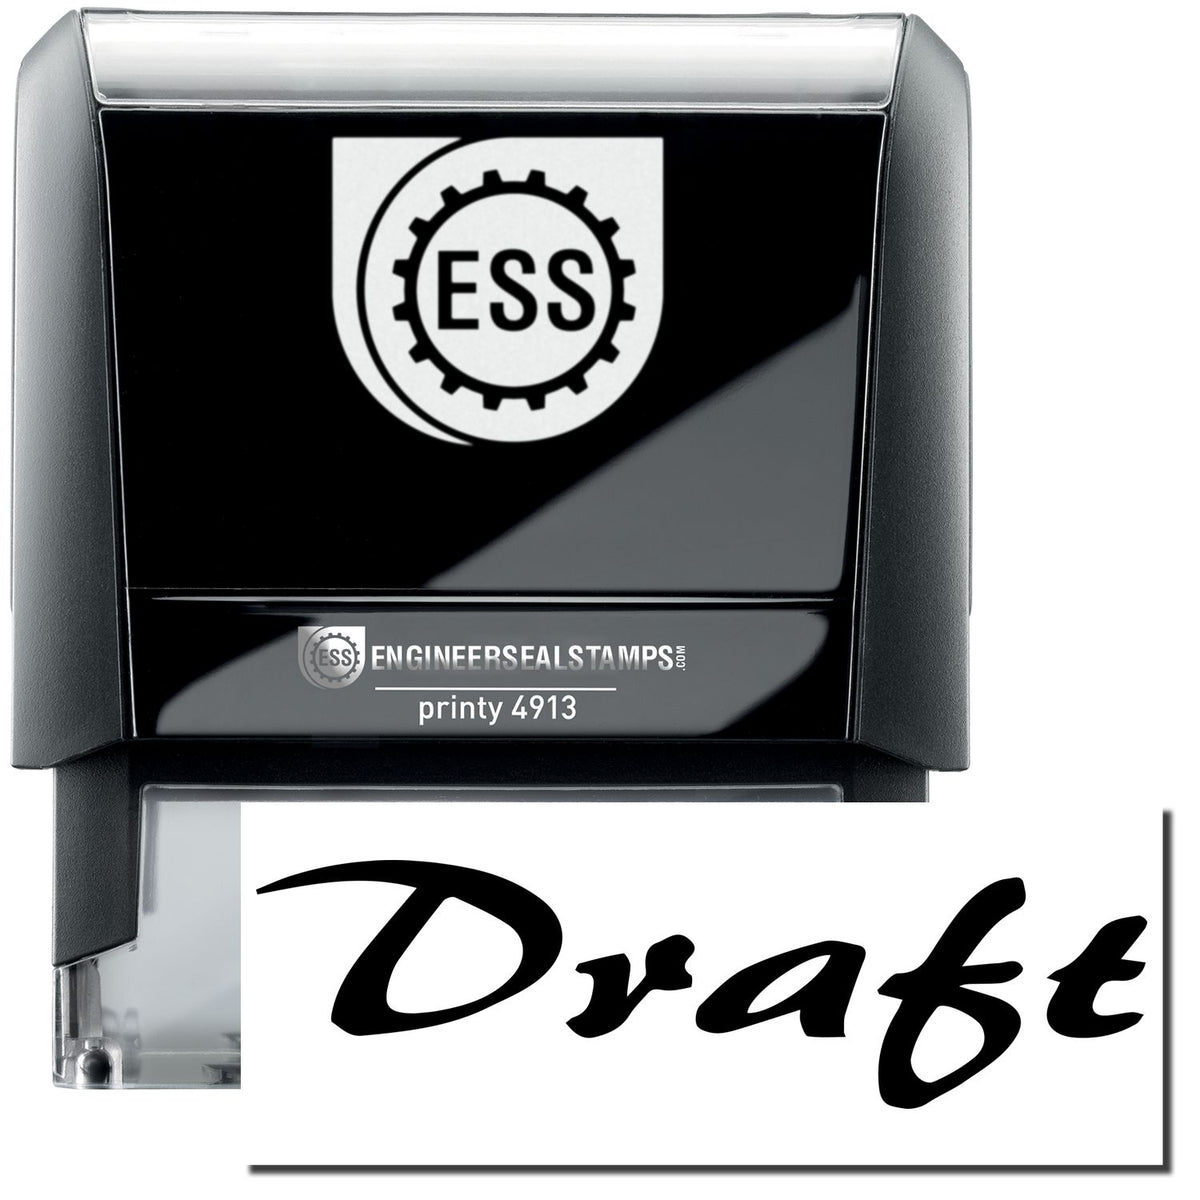 A self-inking stamp with a stamped image showing how the text &quot;Draft&quot; in a large cursive font is displayed by it after stamping.